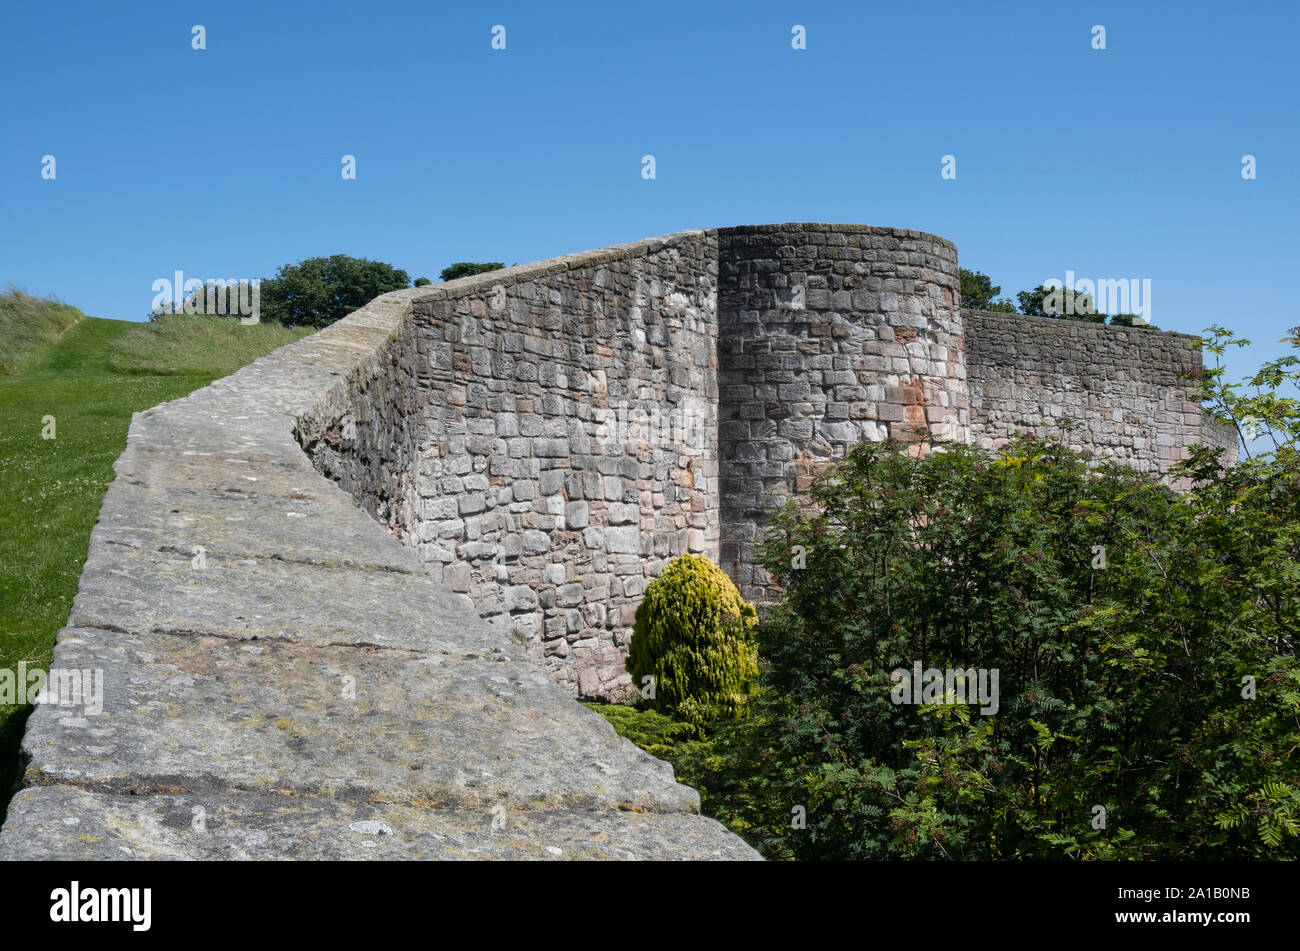 Medieval fortification defensive  stone walls of the city of Berwick-upon-Tweed the English border town in Northumberland England Stock Photo